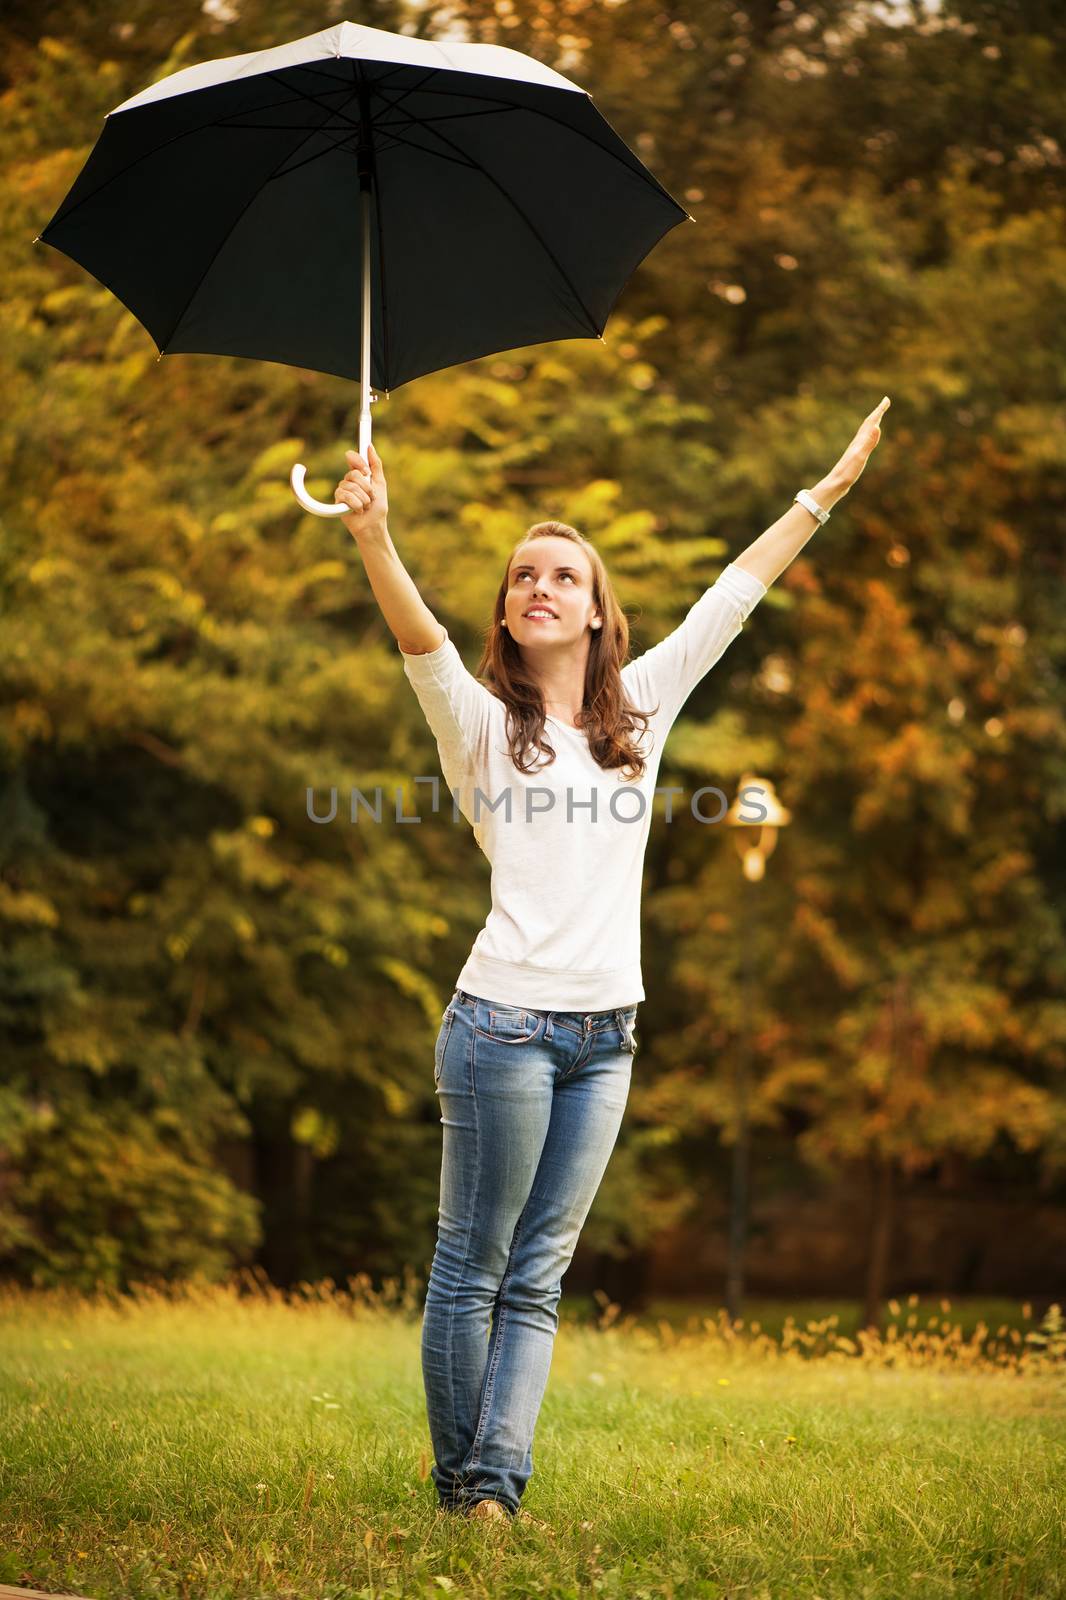 Young Woman With Umbrella by MilanMarkovic78